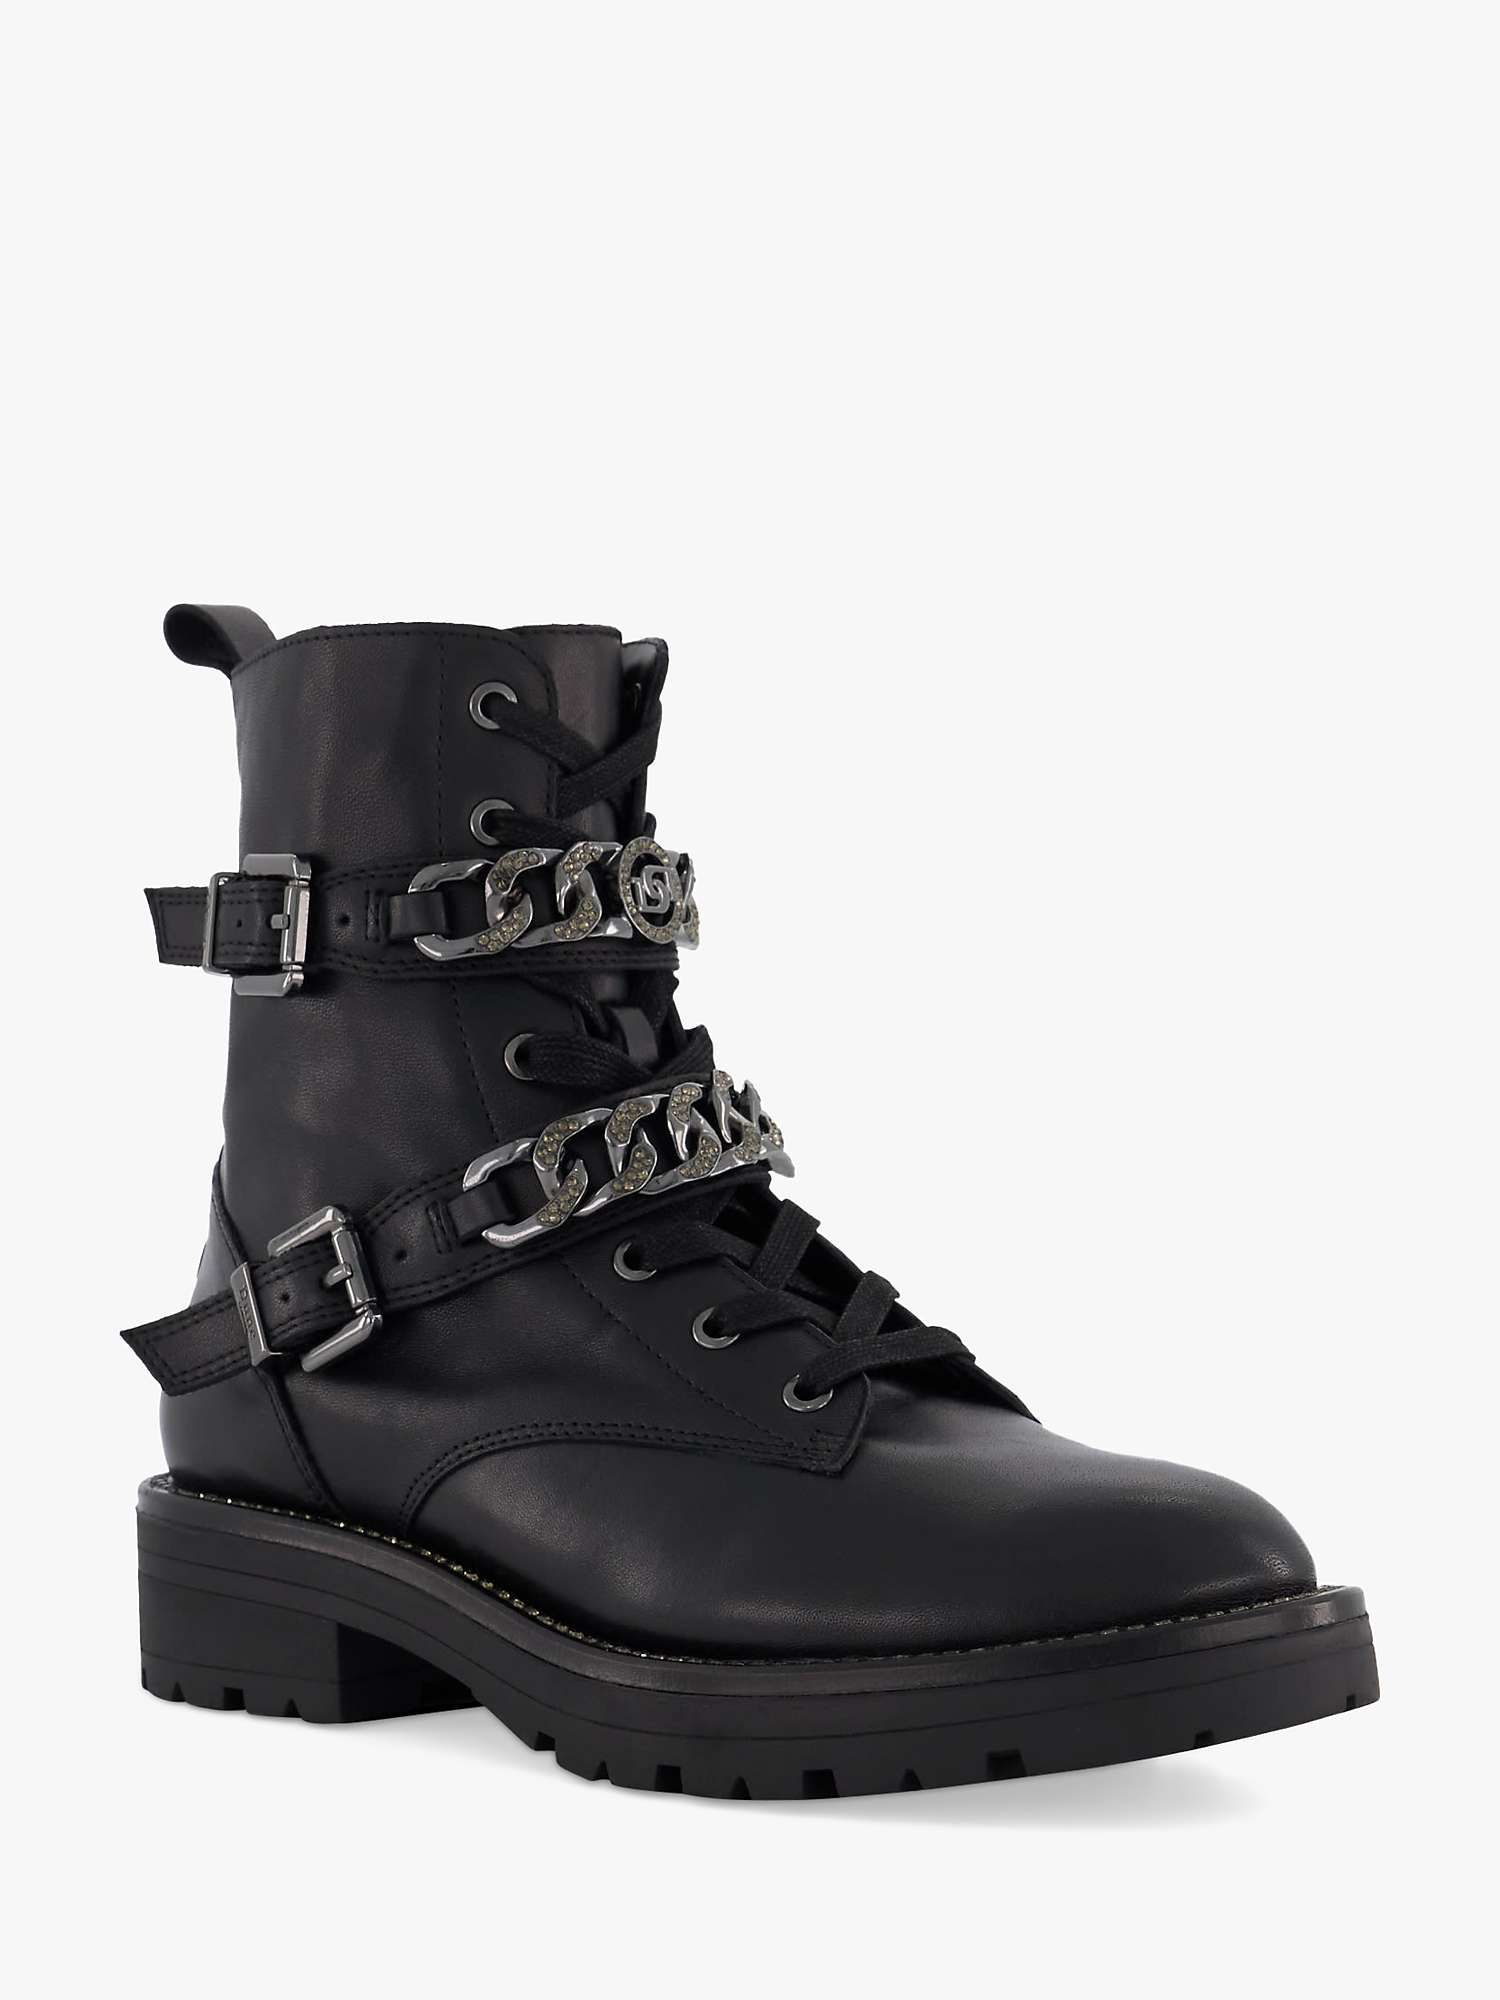 Buy Dune Plazas Leather Ankle Boots Online at johnlewis.com